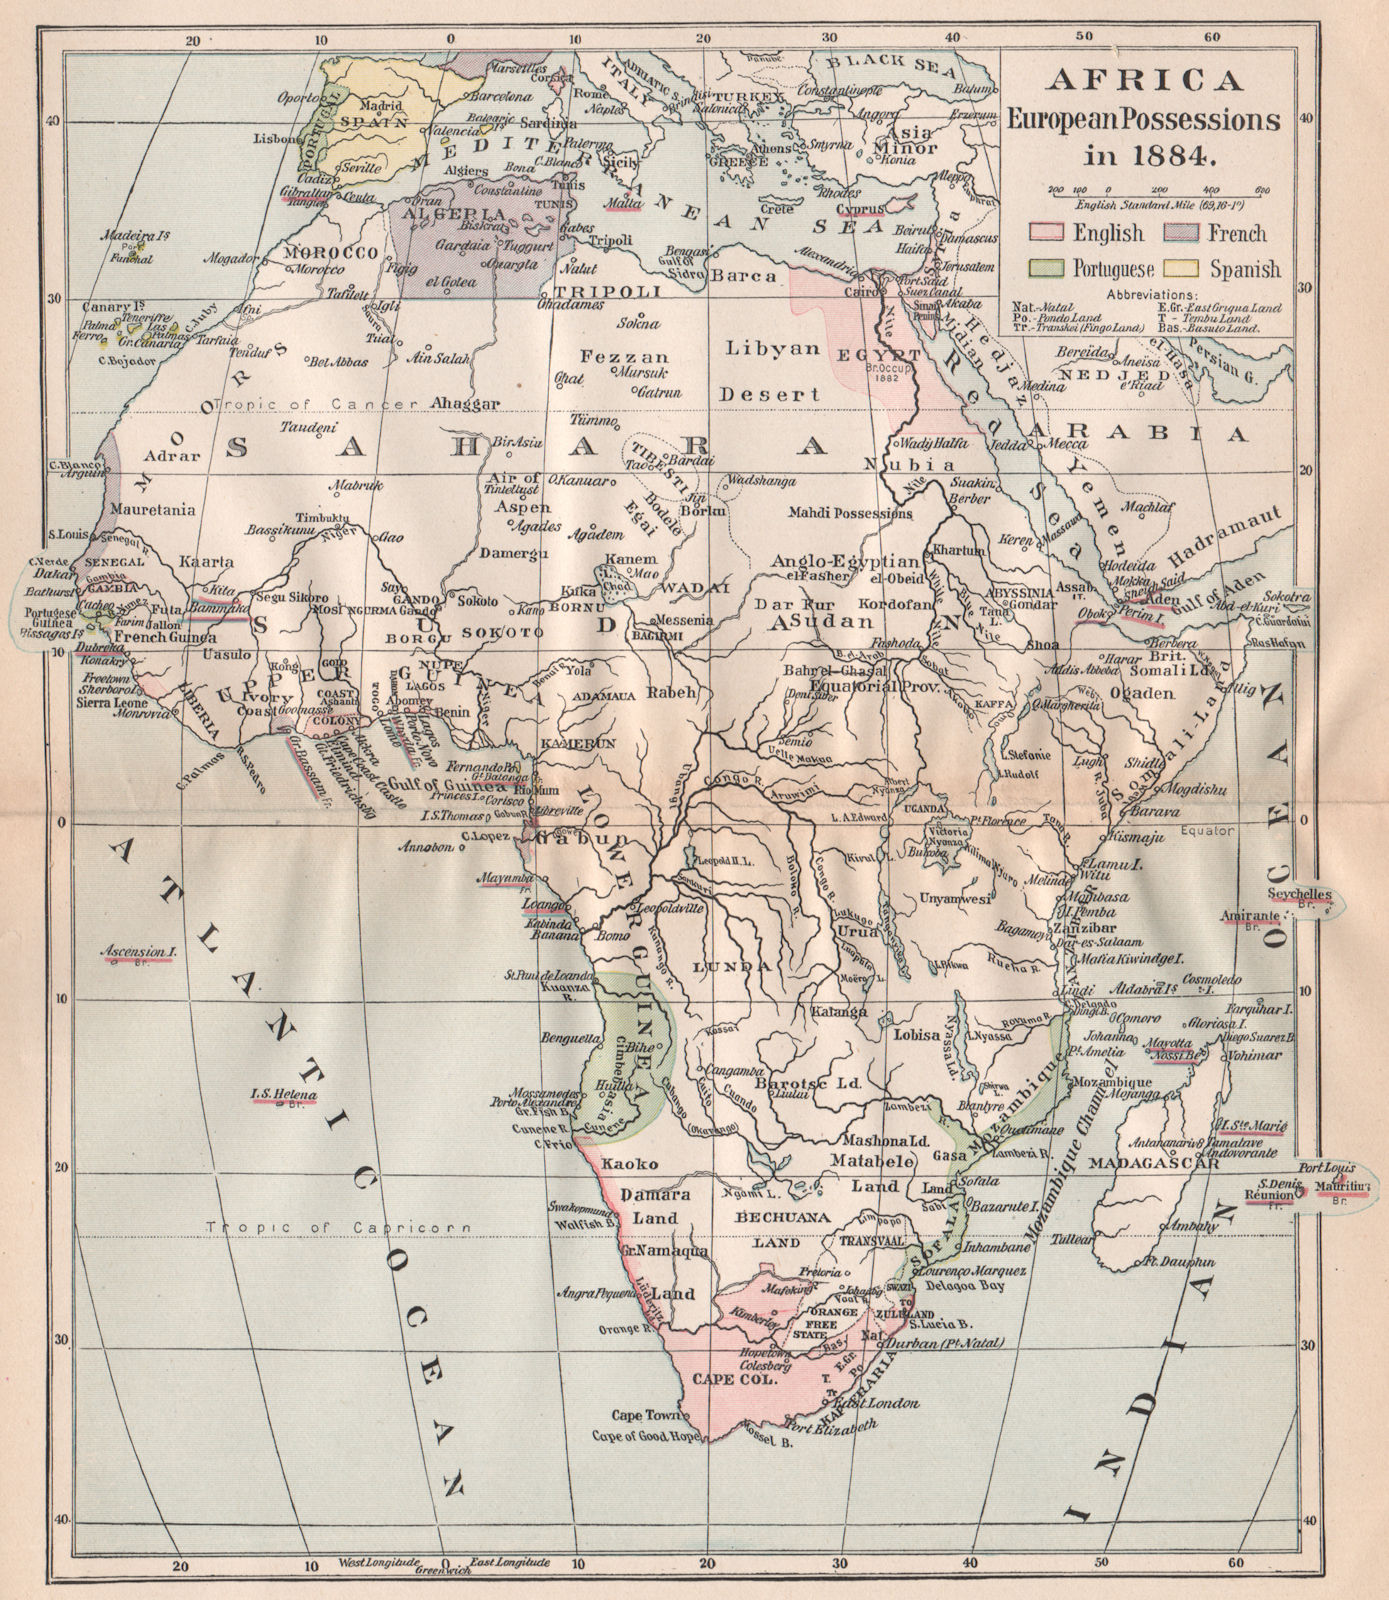 AFRICA 1884. European possessions colonies. English French Portuguese 1917 map